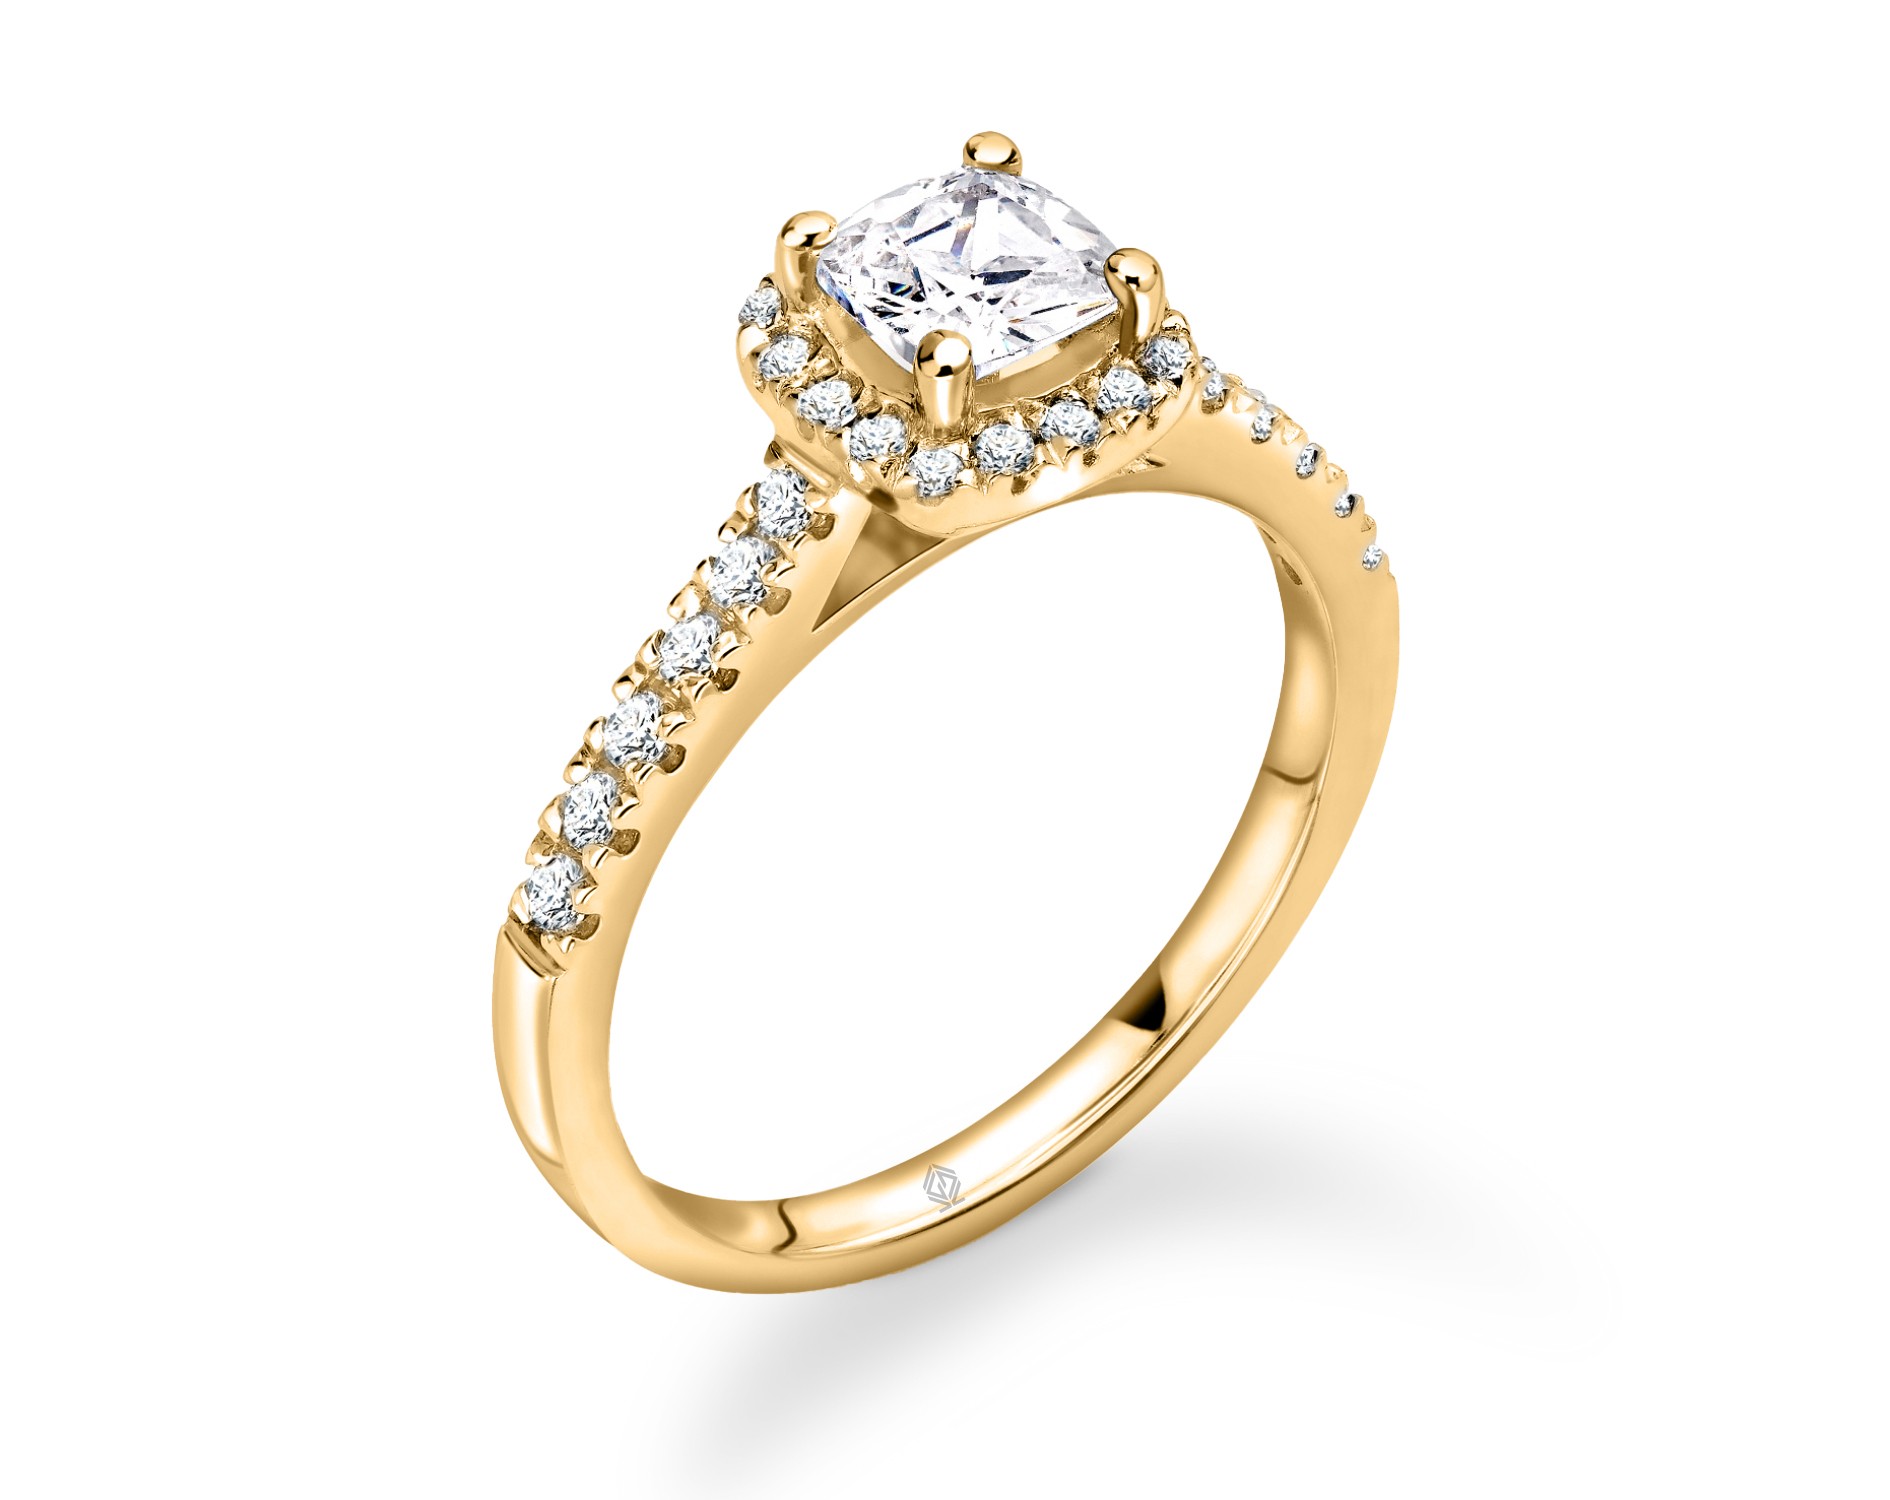 18K YELLOW GOLD HALO CUSHION CUT DIAMOND ENGAGEMENT RING WITH SIDE STONES PAVE SET